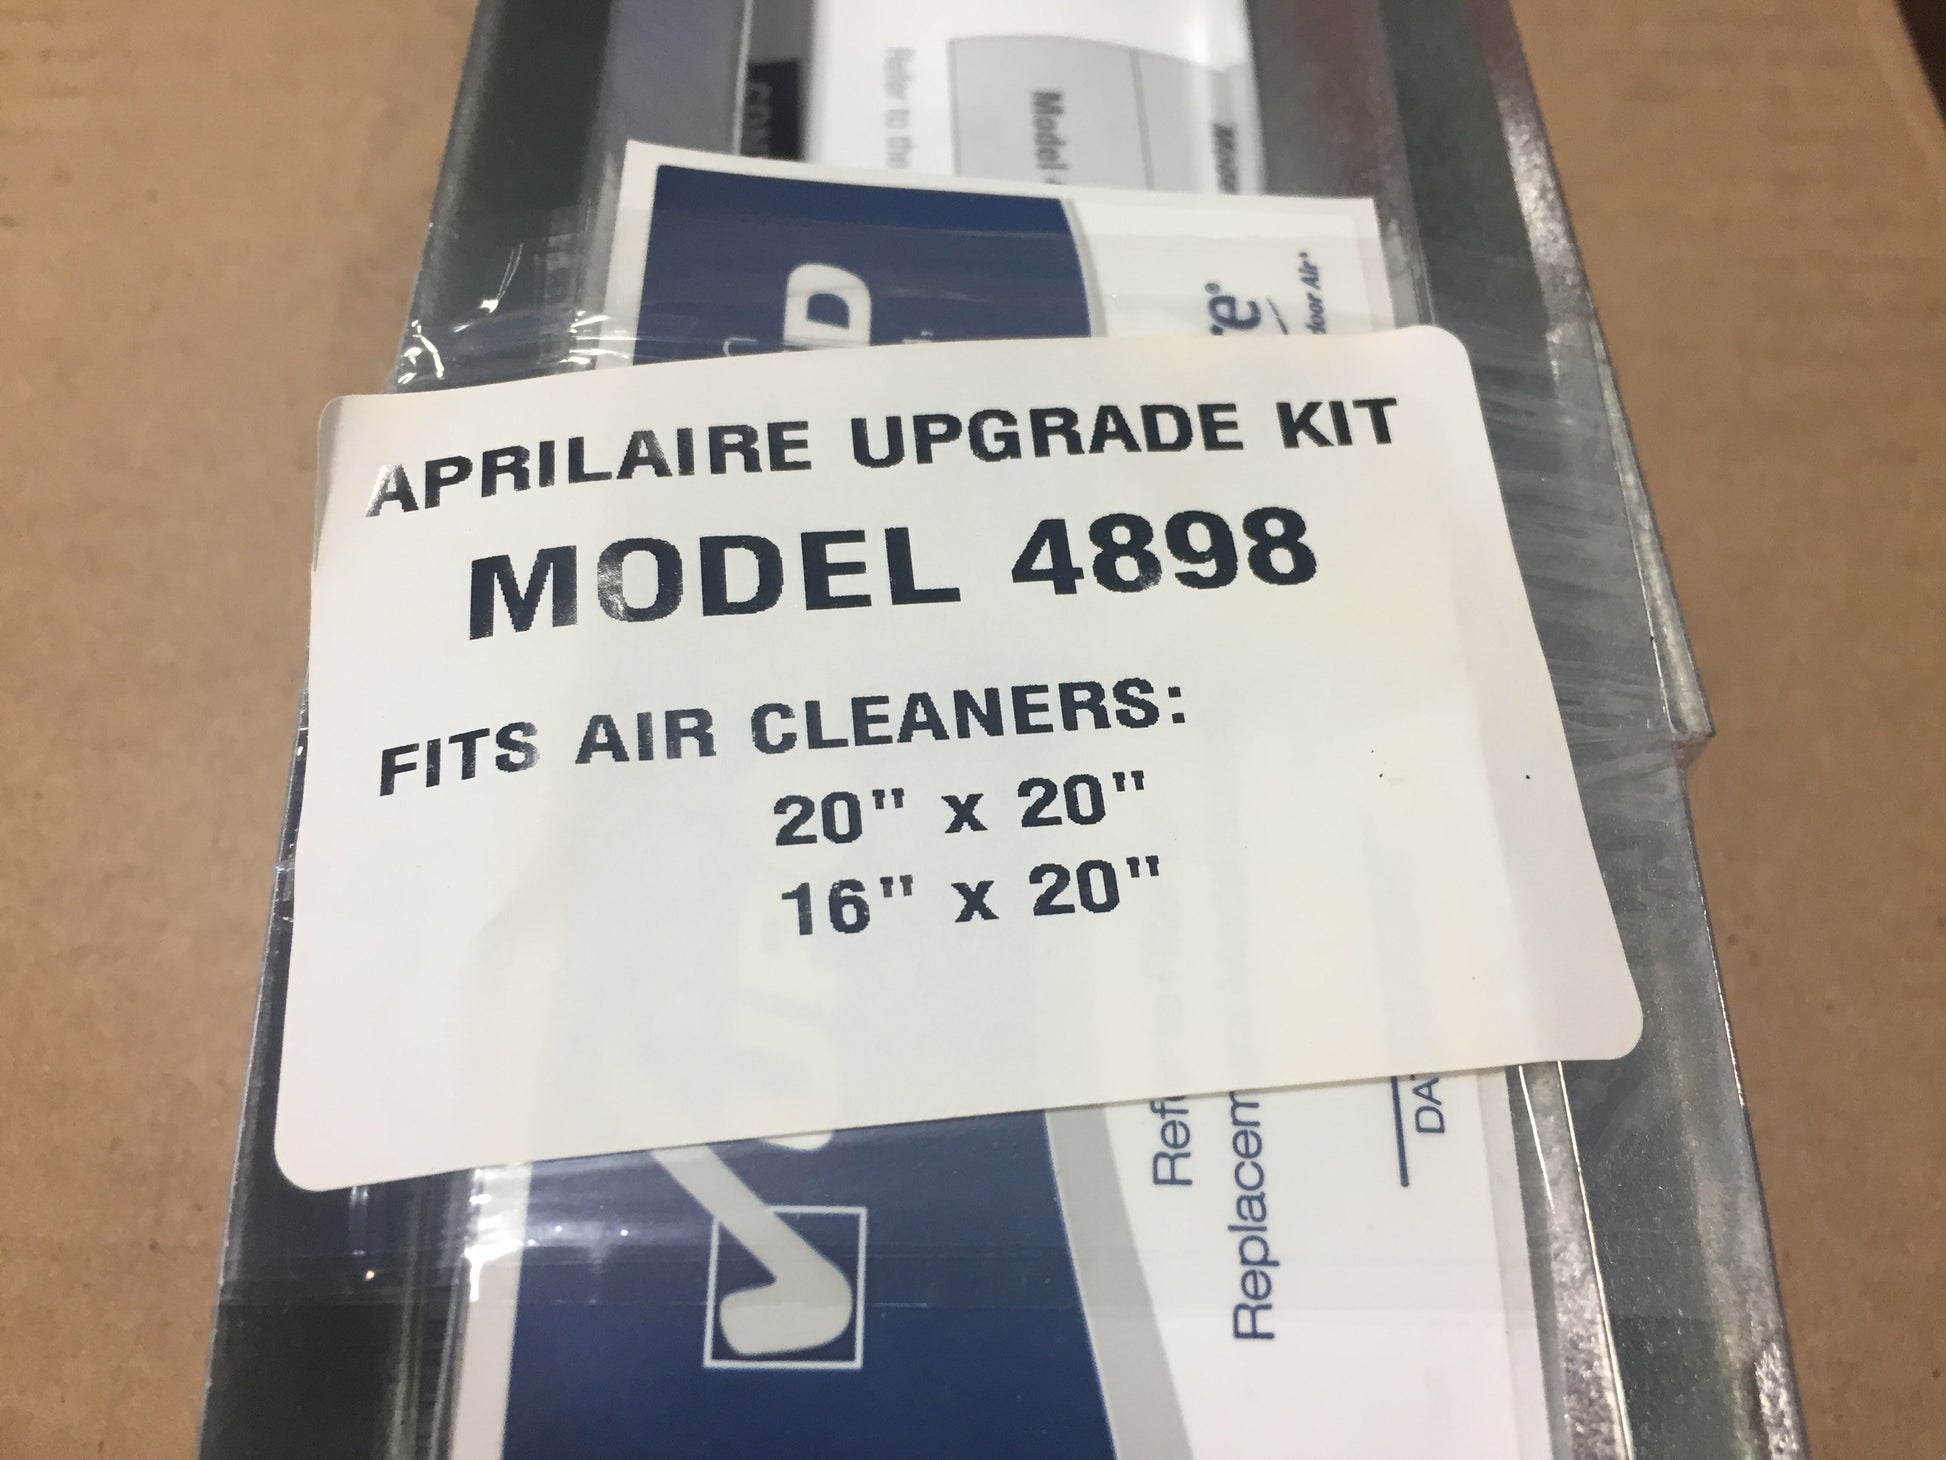 FILTER FRAME UPGRADE KIT FOR 2200/2120 SERIES MEDIA AIR CLEANERS, SOLD AS 8 PER BOX